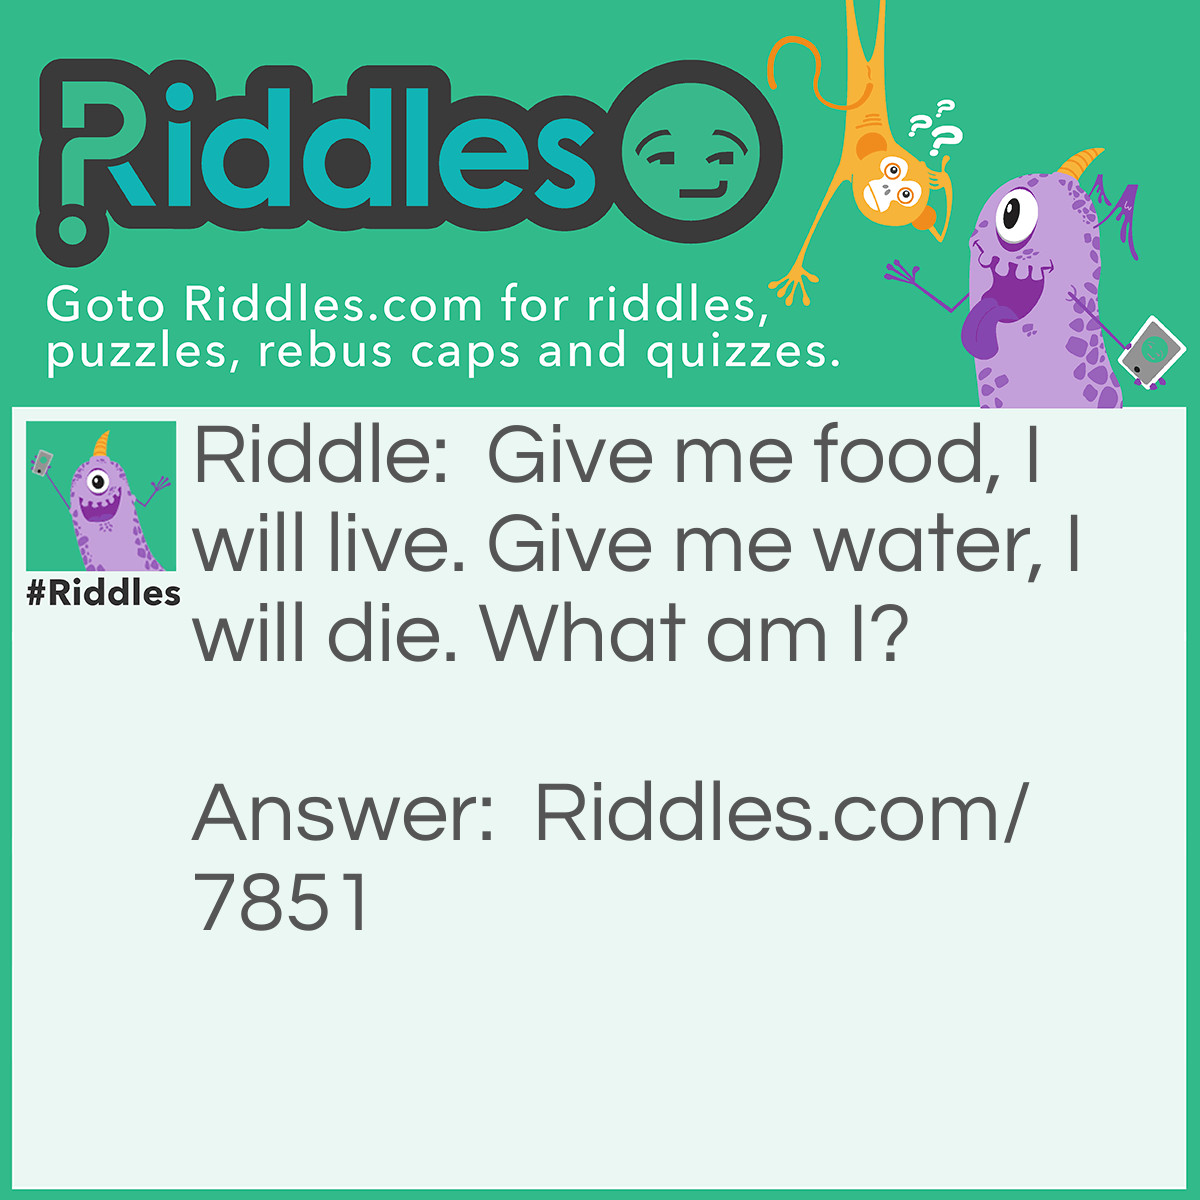 Riddle: Give me food, I will live. Give me water, I will die. What am I? Answer: Fire